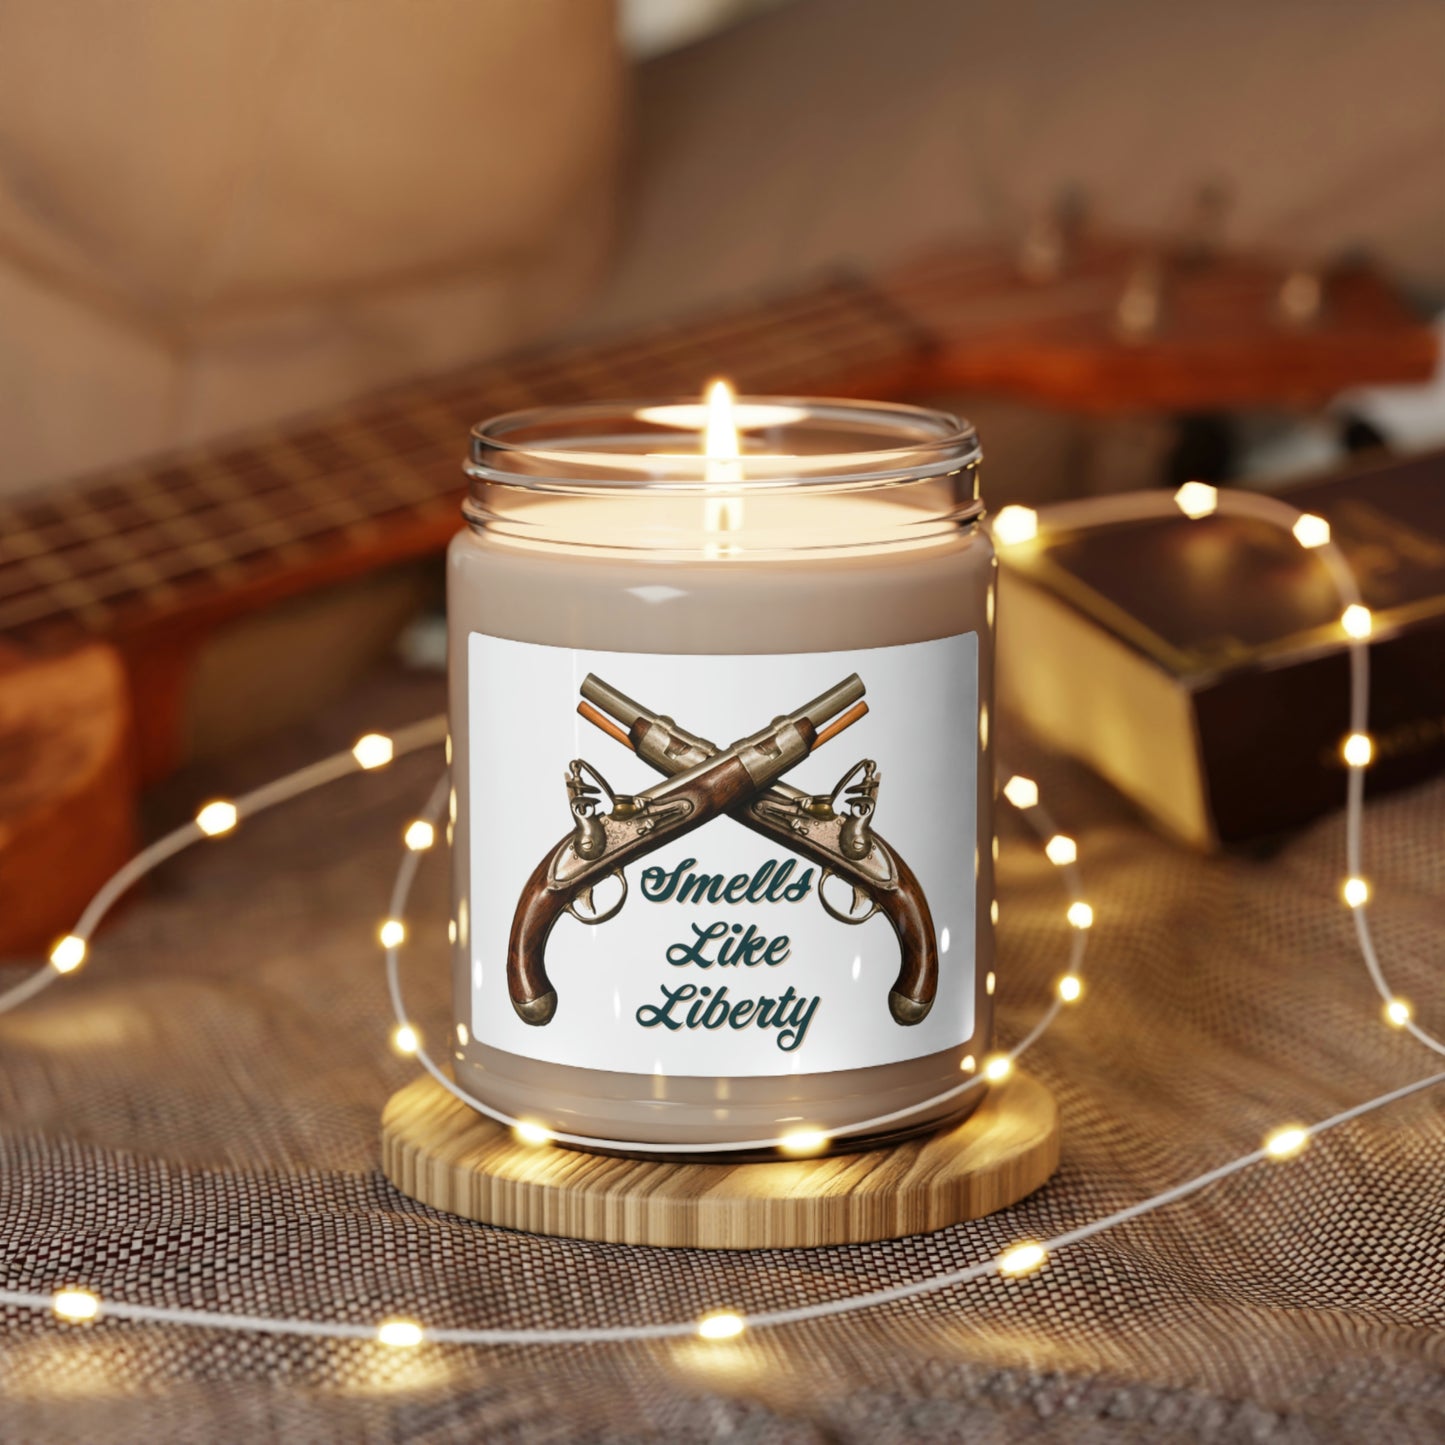 Smells Like Liberty Flintlock Scented Soy Candle, 9oz